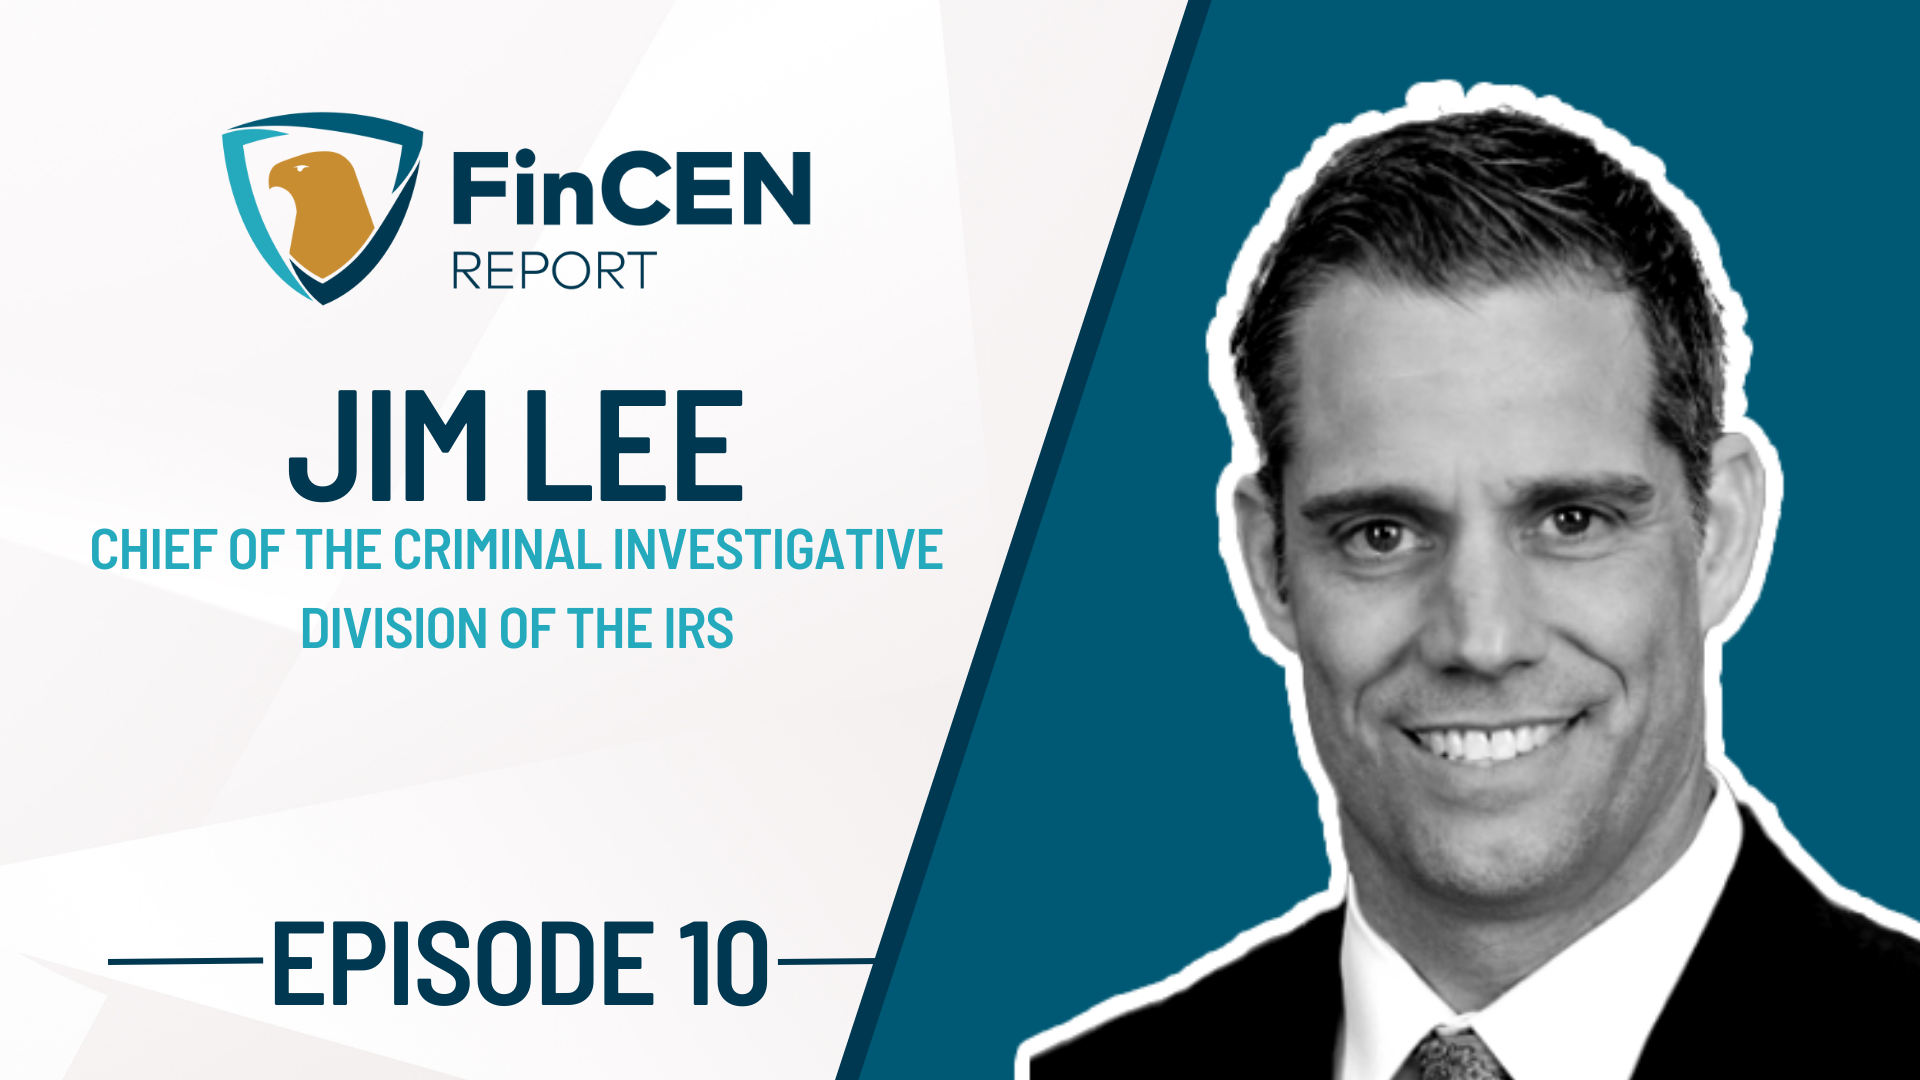 Blog cover image of Jim Lee featured on the FinCEN REPORT podcast.